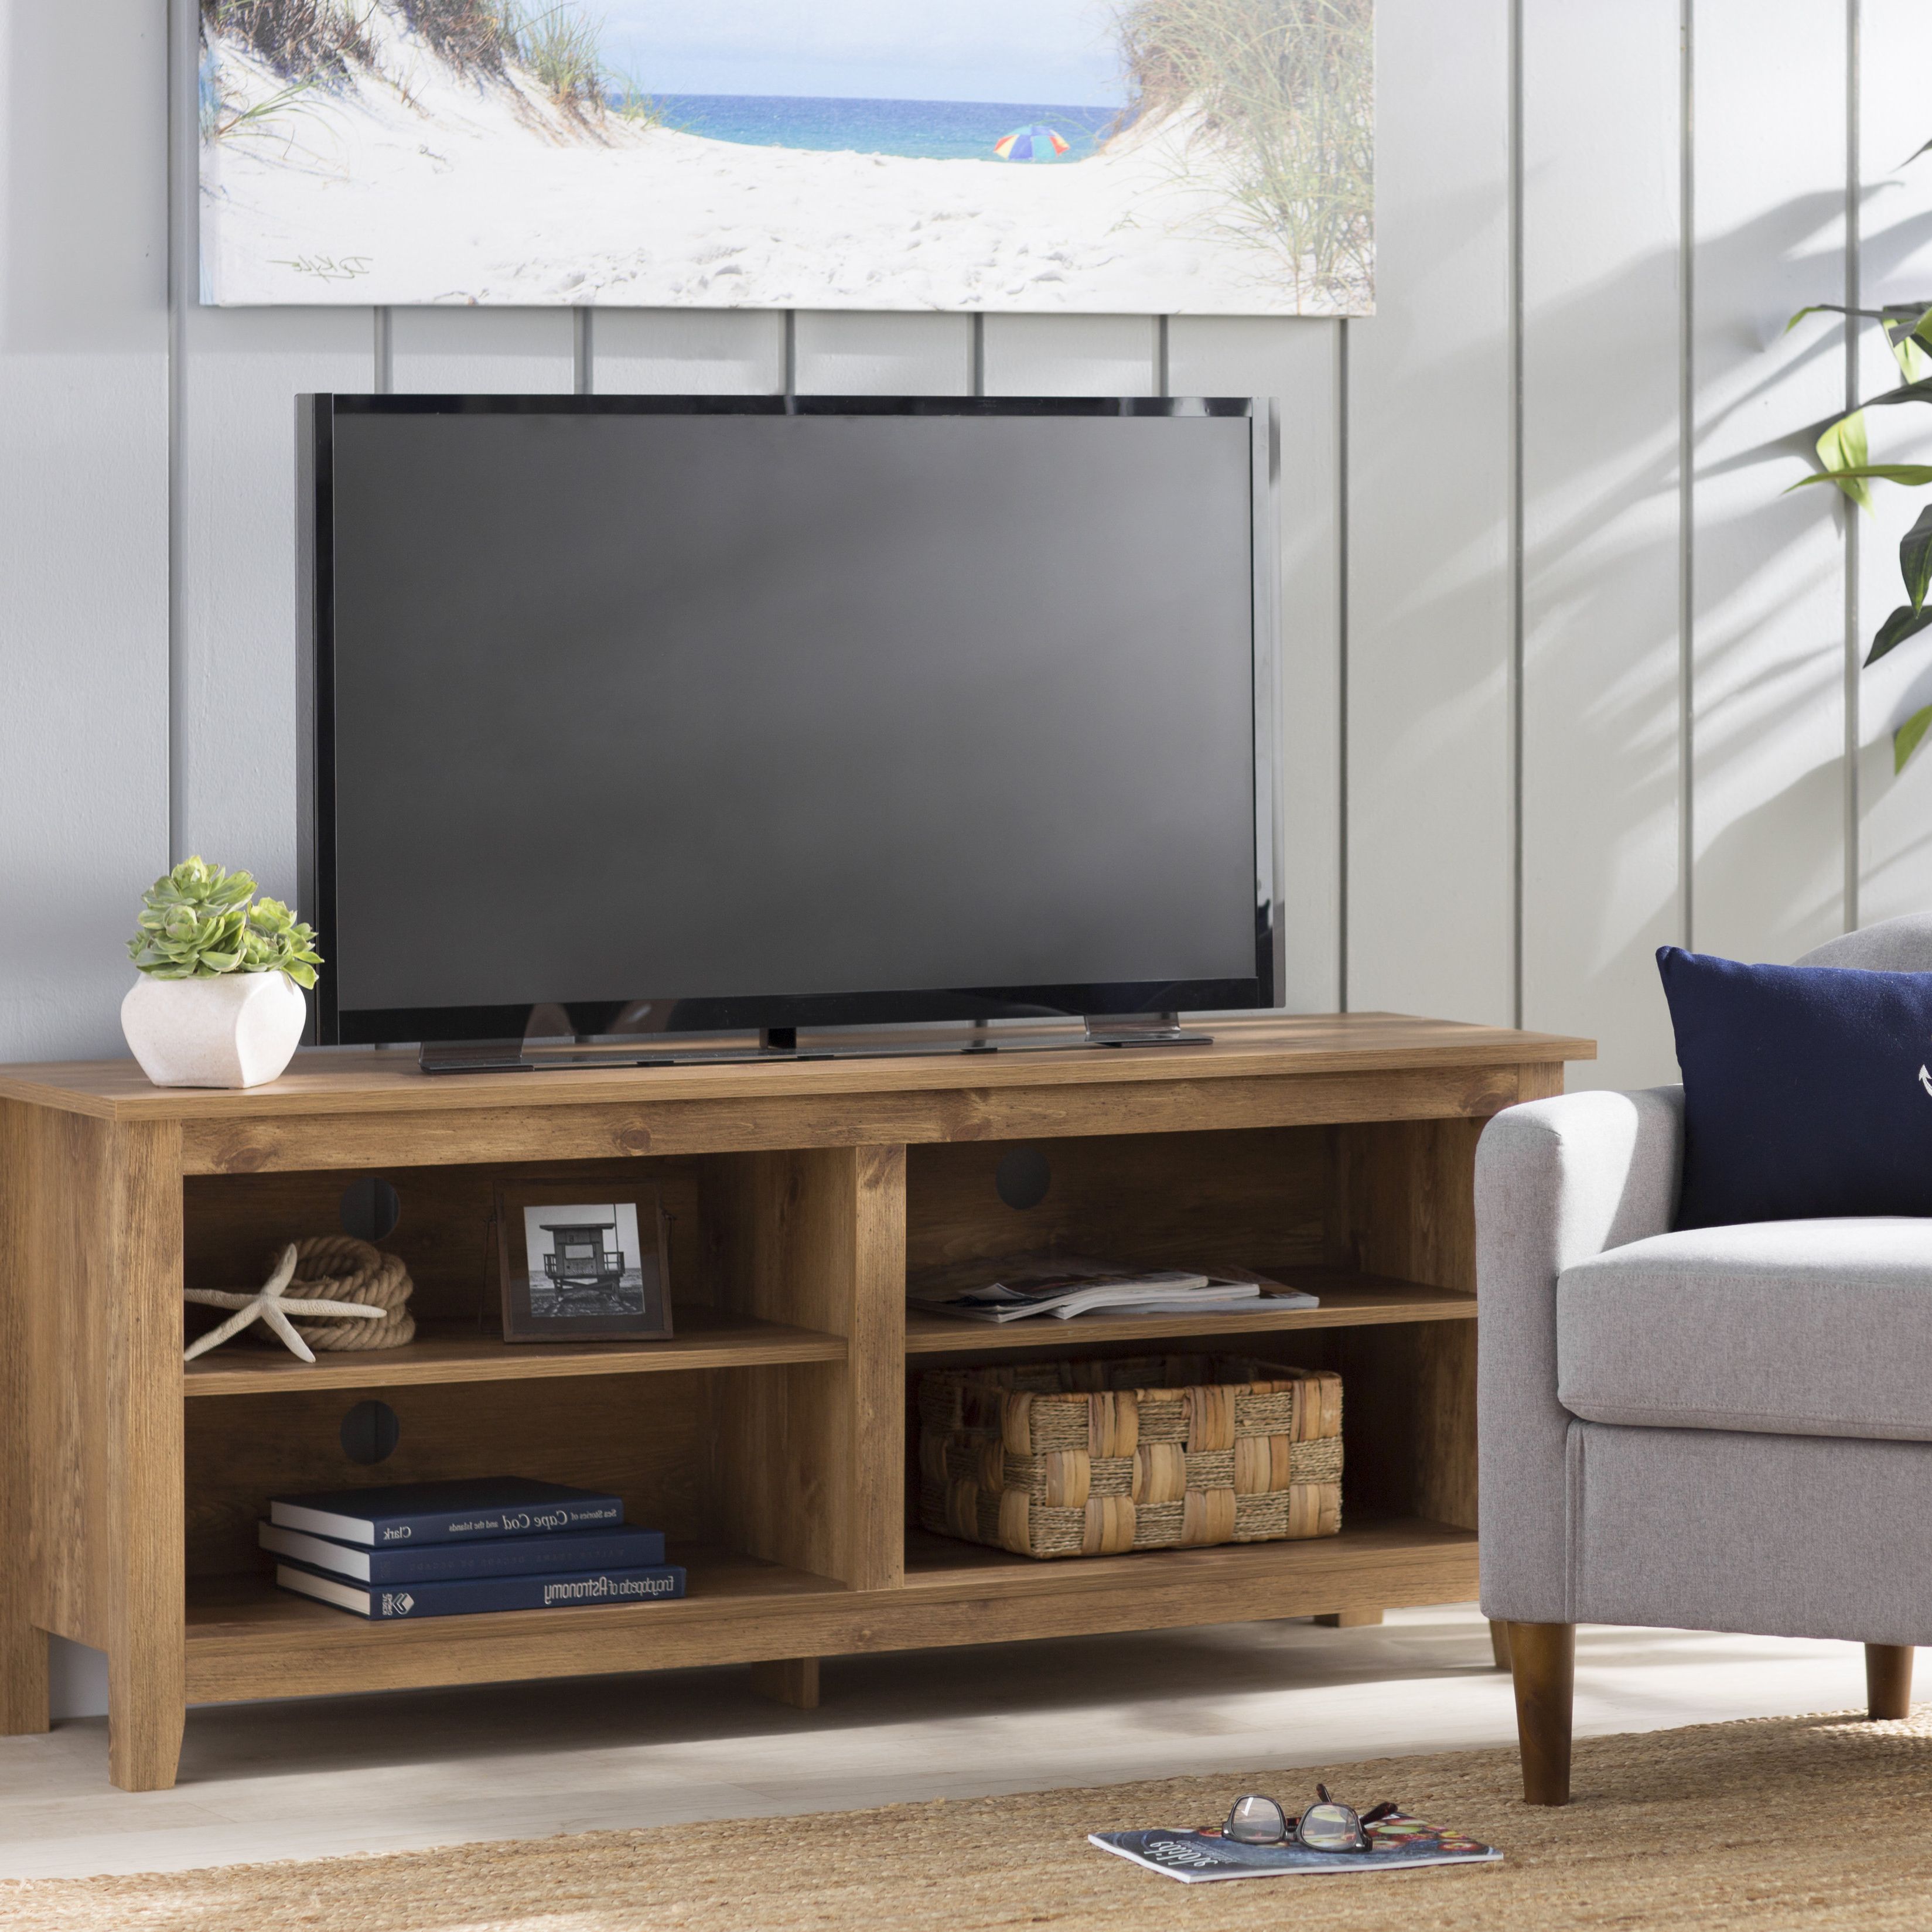 Well Liked Tv Stands & Entertainment Centers You'll Love Regarding Bookshelf And Tv Stands (View 10 of 20)